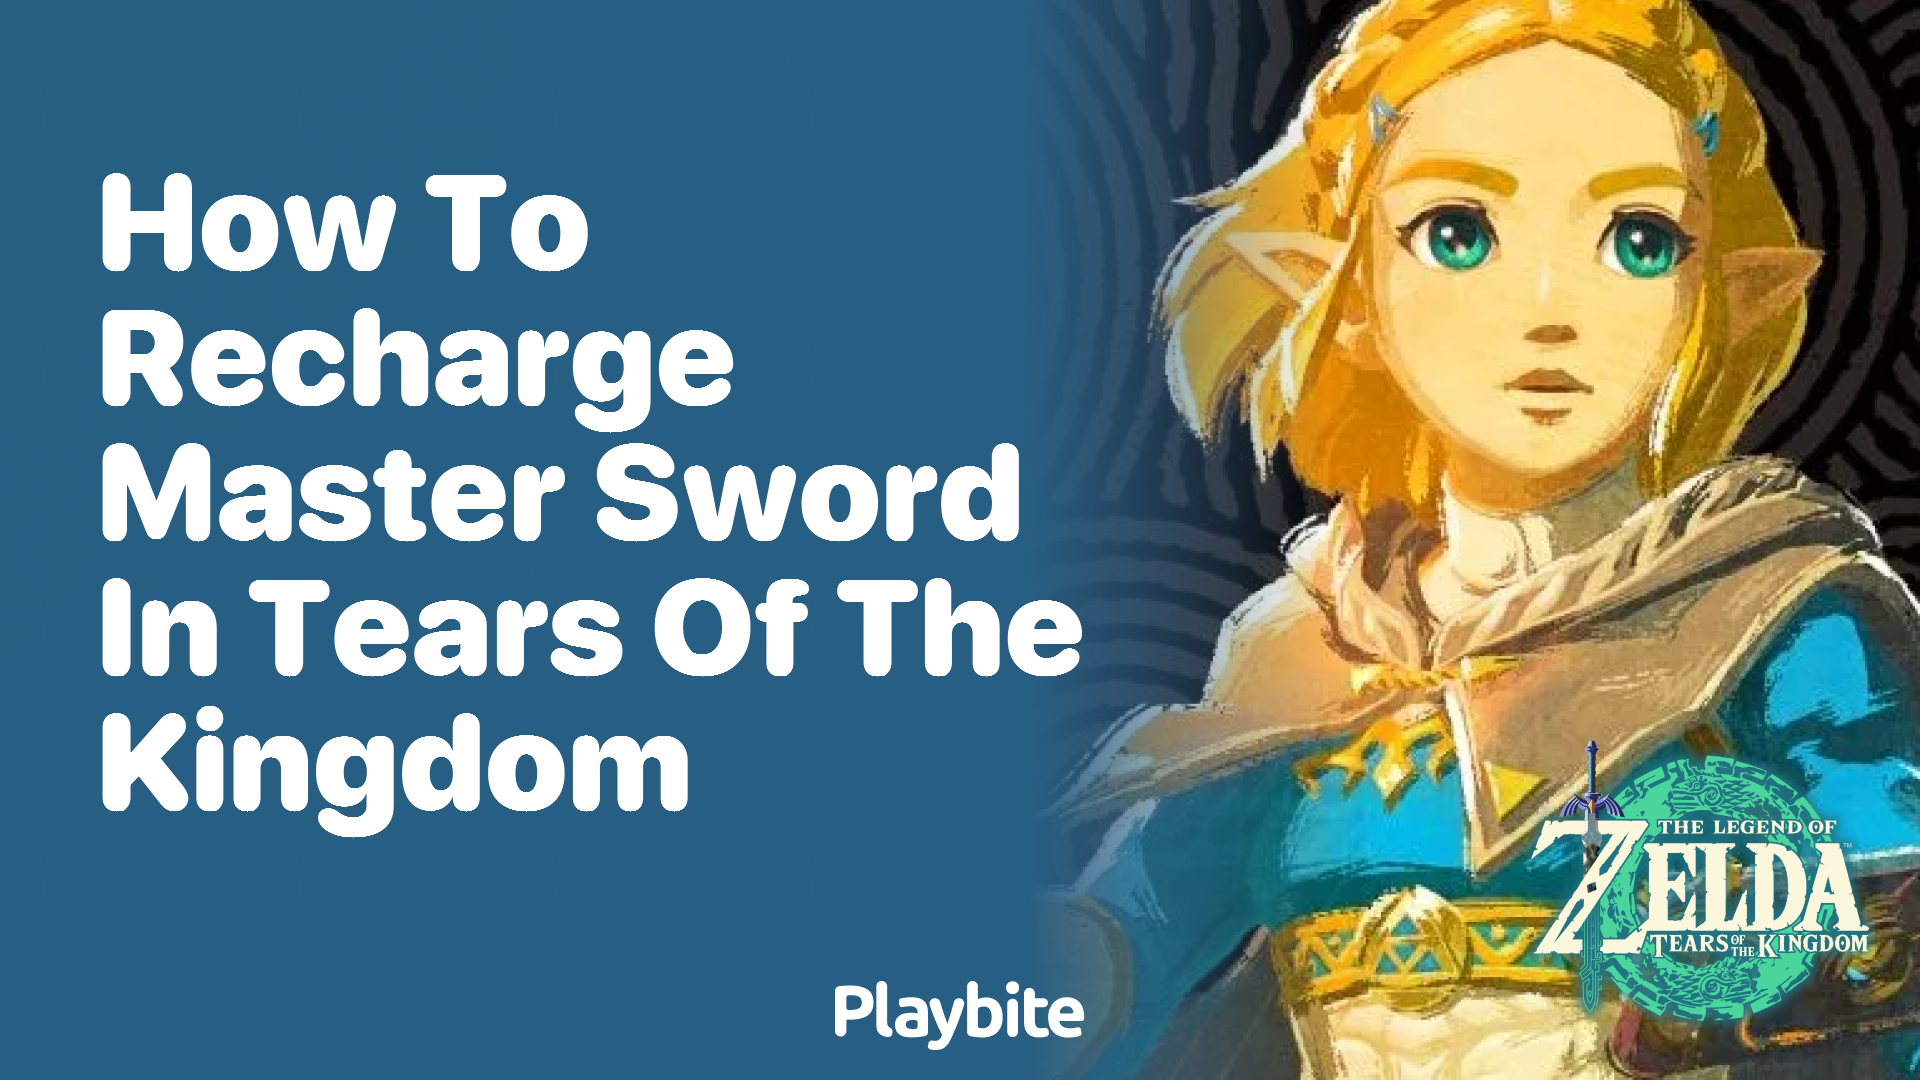 How to Recharge the Master Sword in Tears of the Kingdom